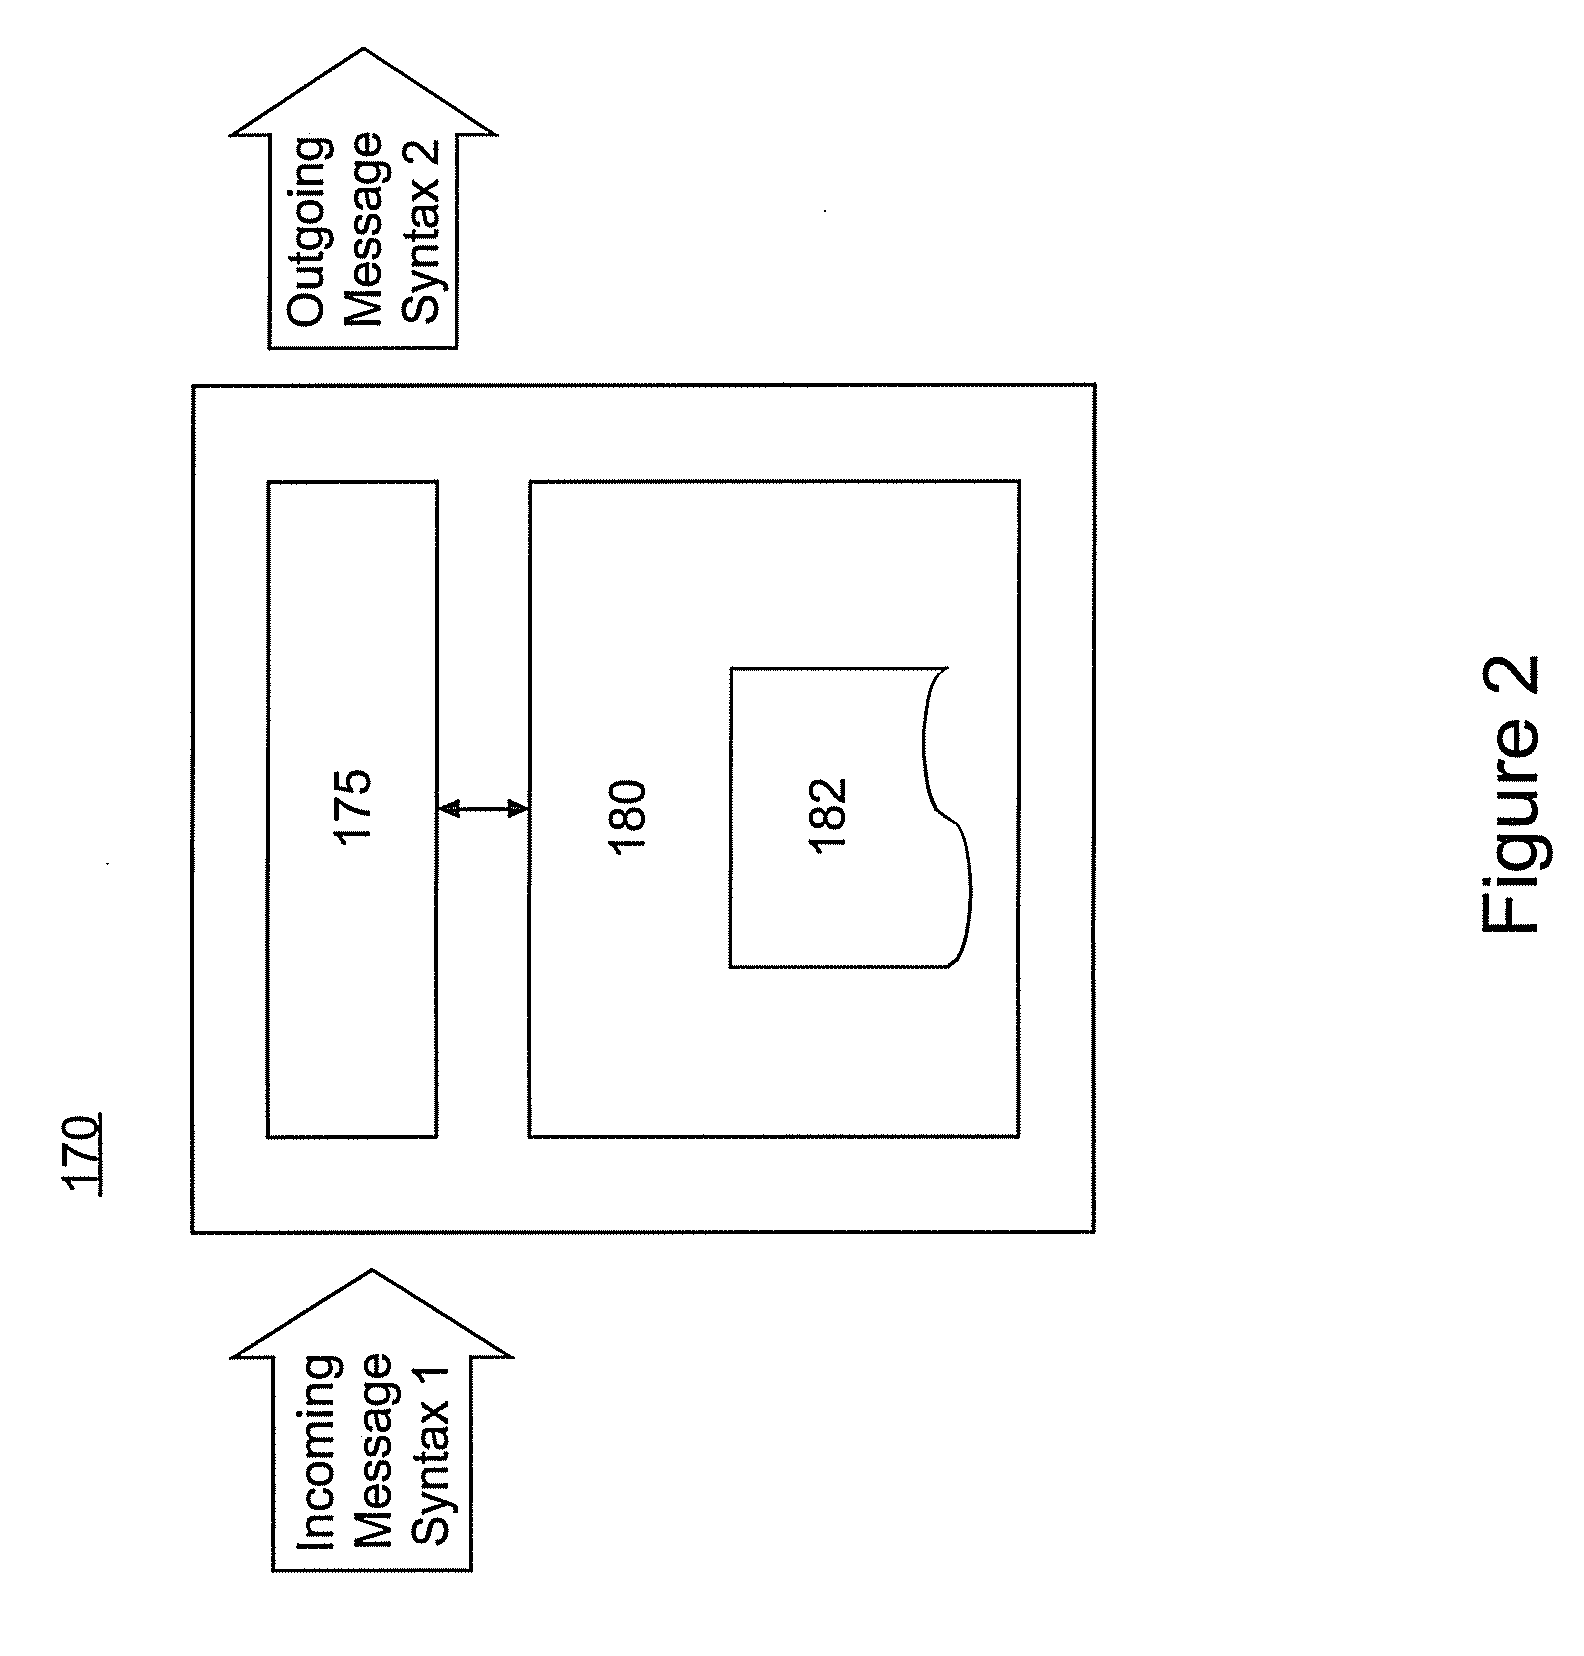 Method and system for routing data repository messages between computing devices